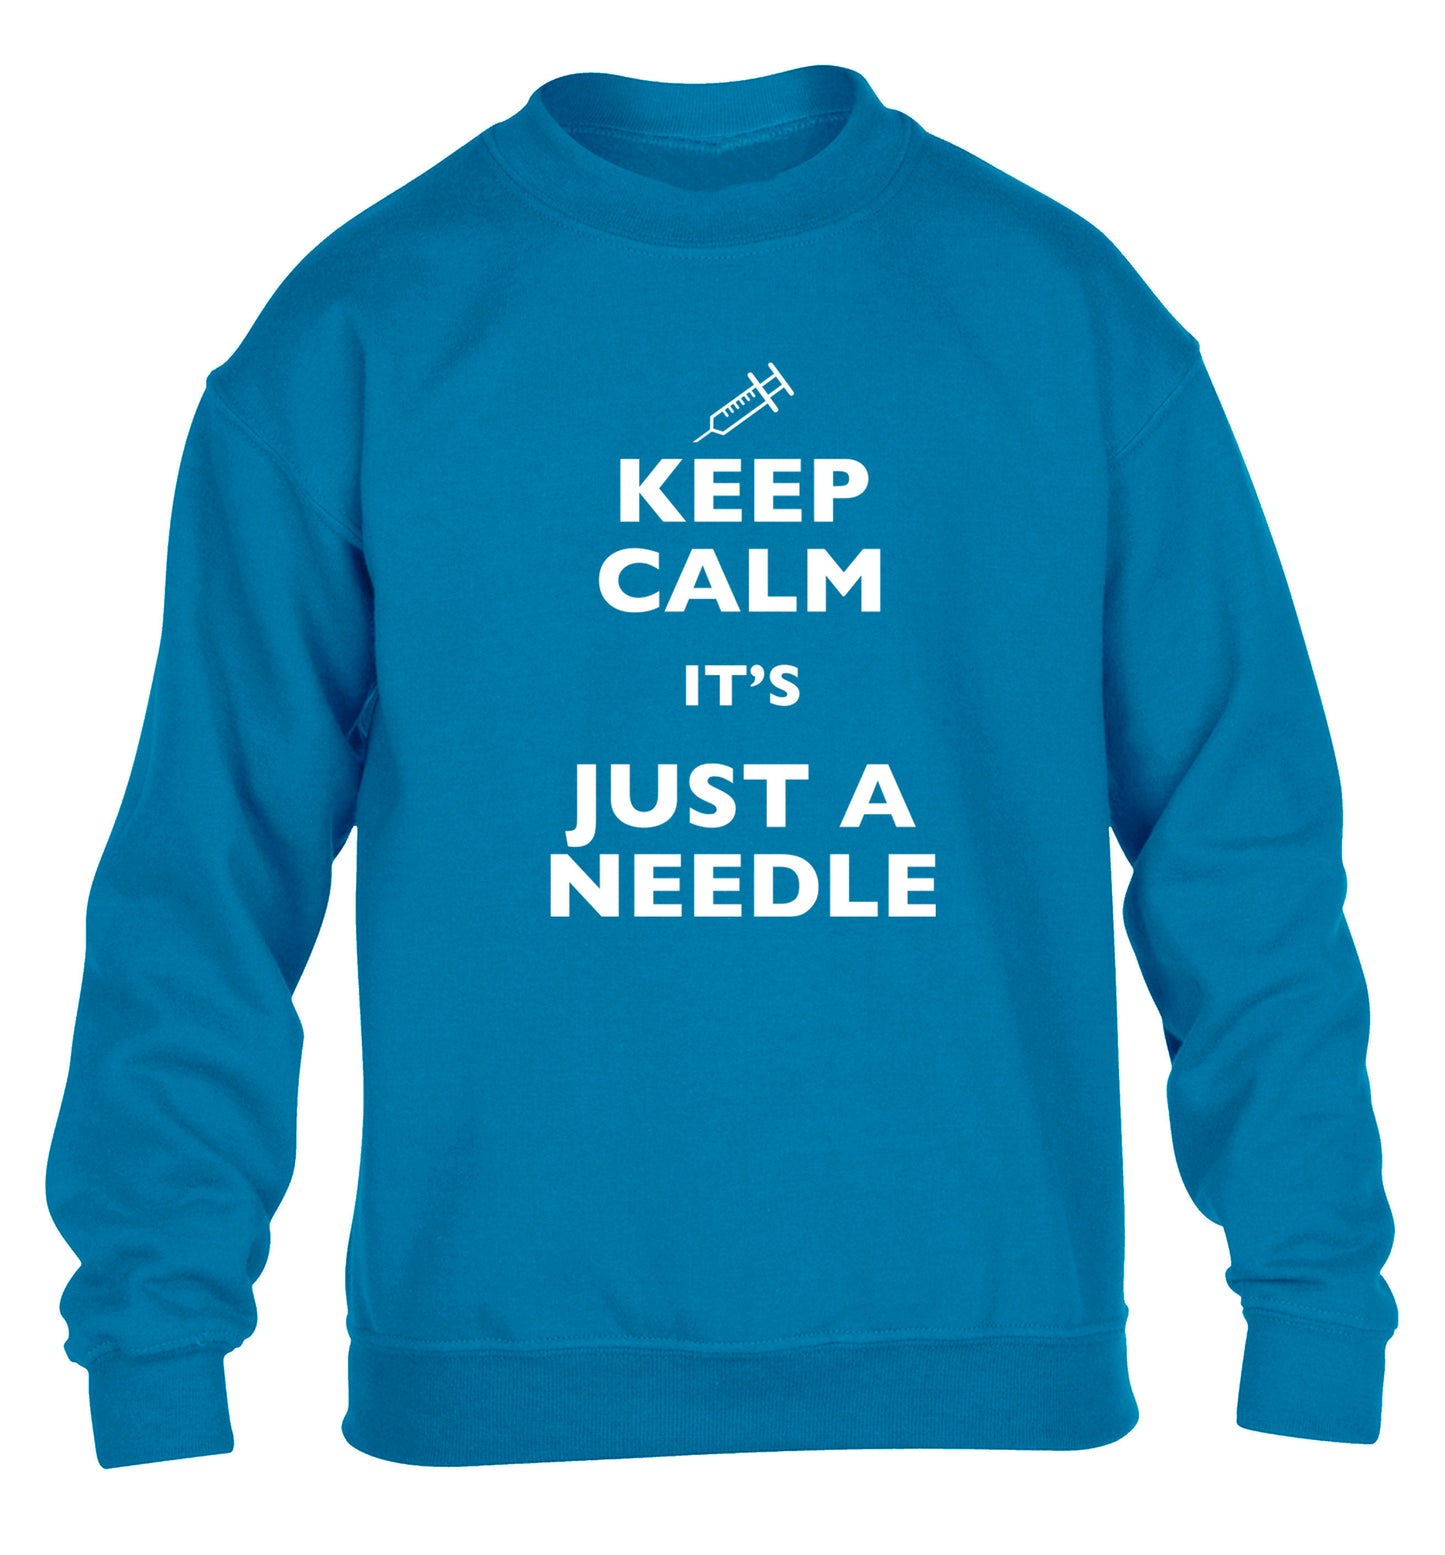 Keep calm it's only a needle children's blue sweater 12-14 Years